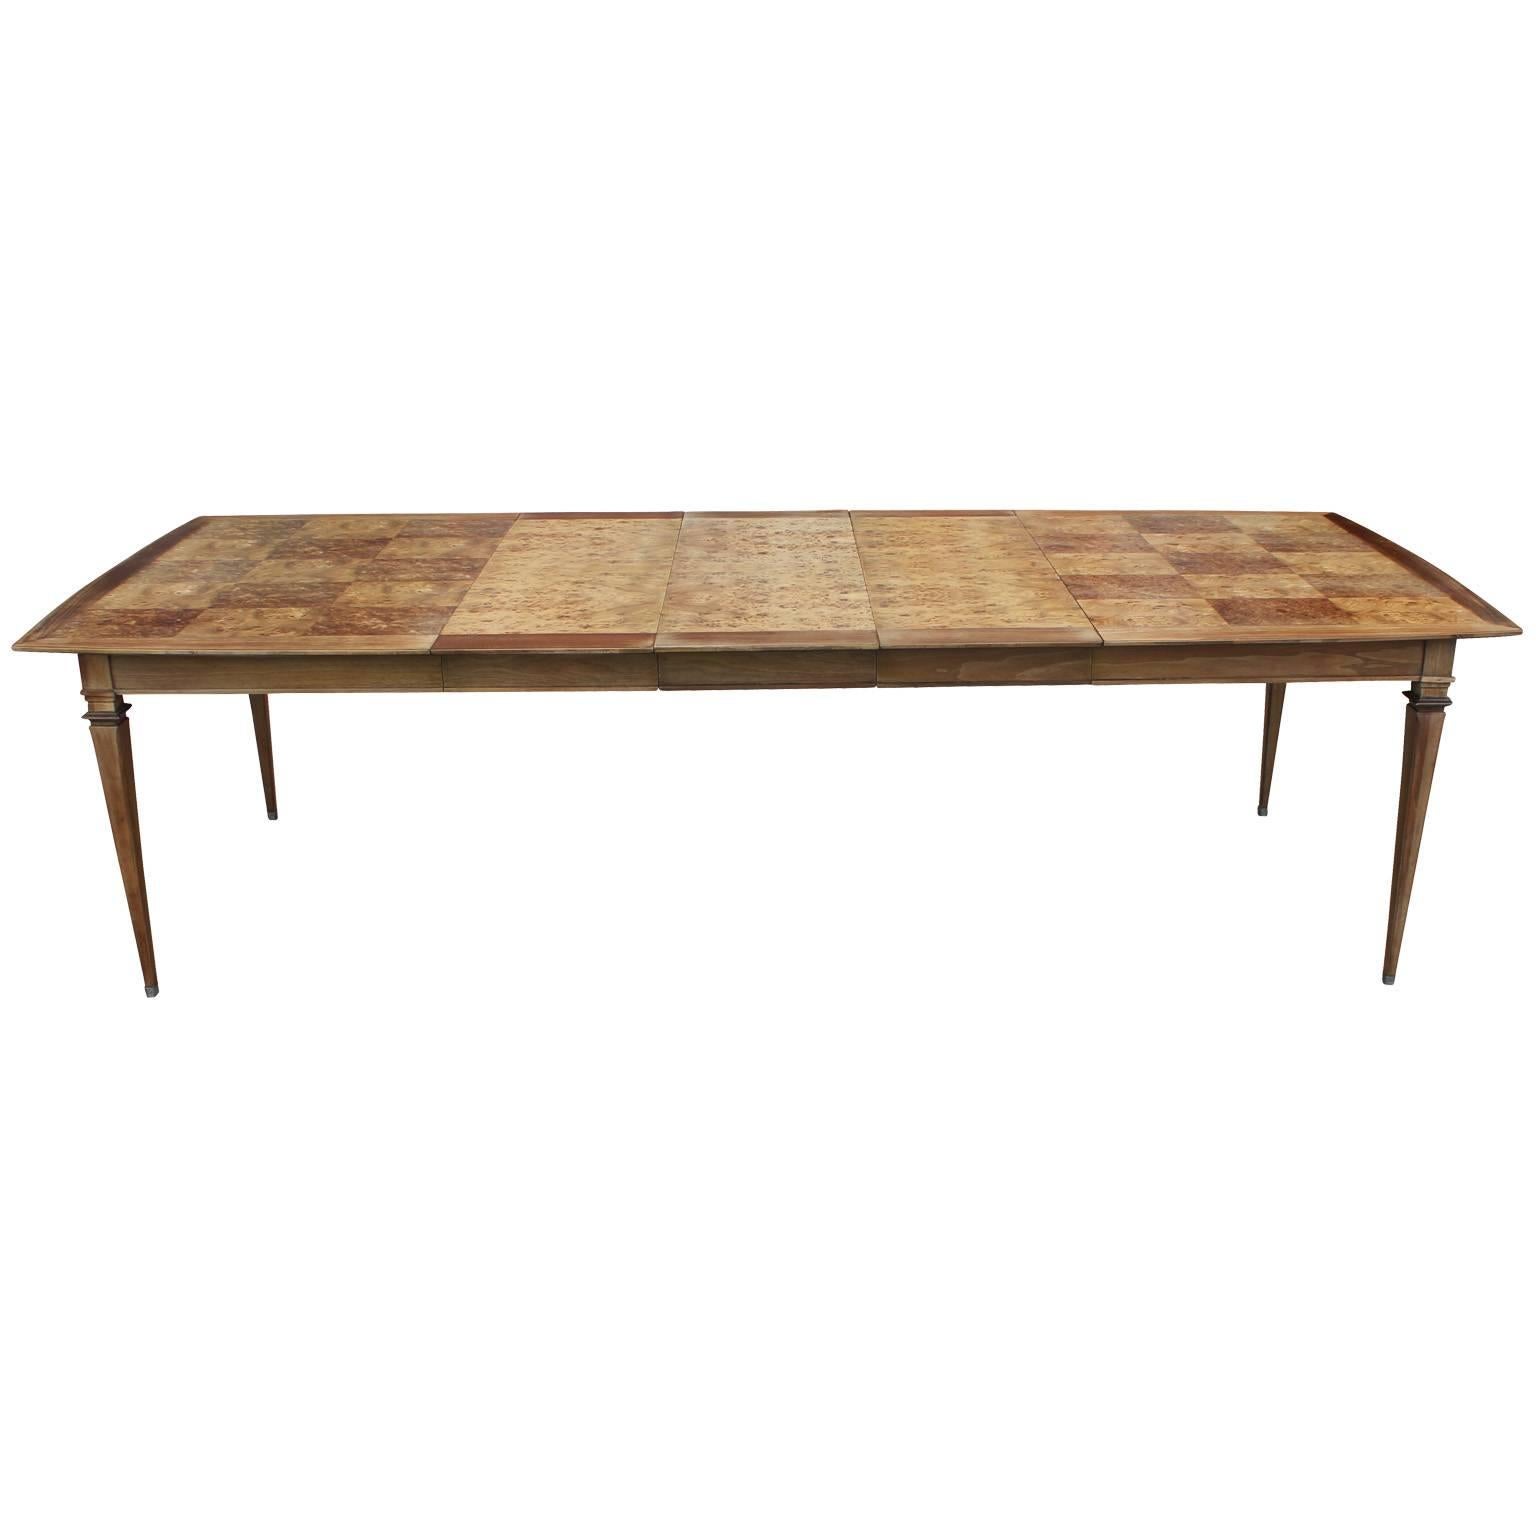 Hollywood Regency Modern Burl Parquetry Dining Table by Bernhard Rohne for Mastercraft